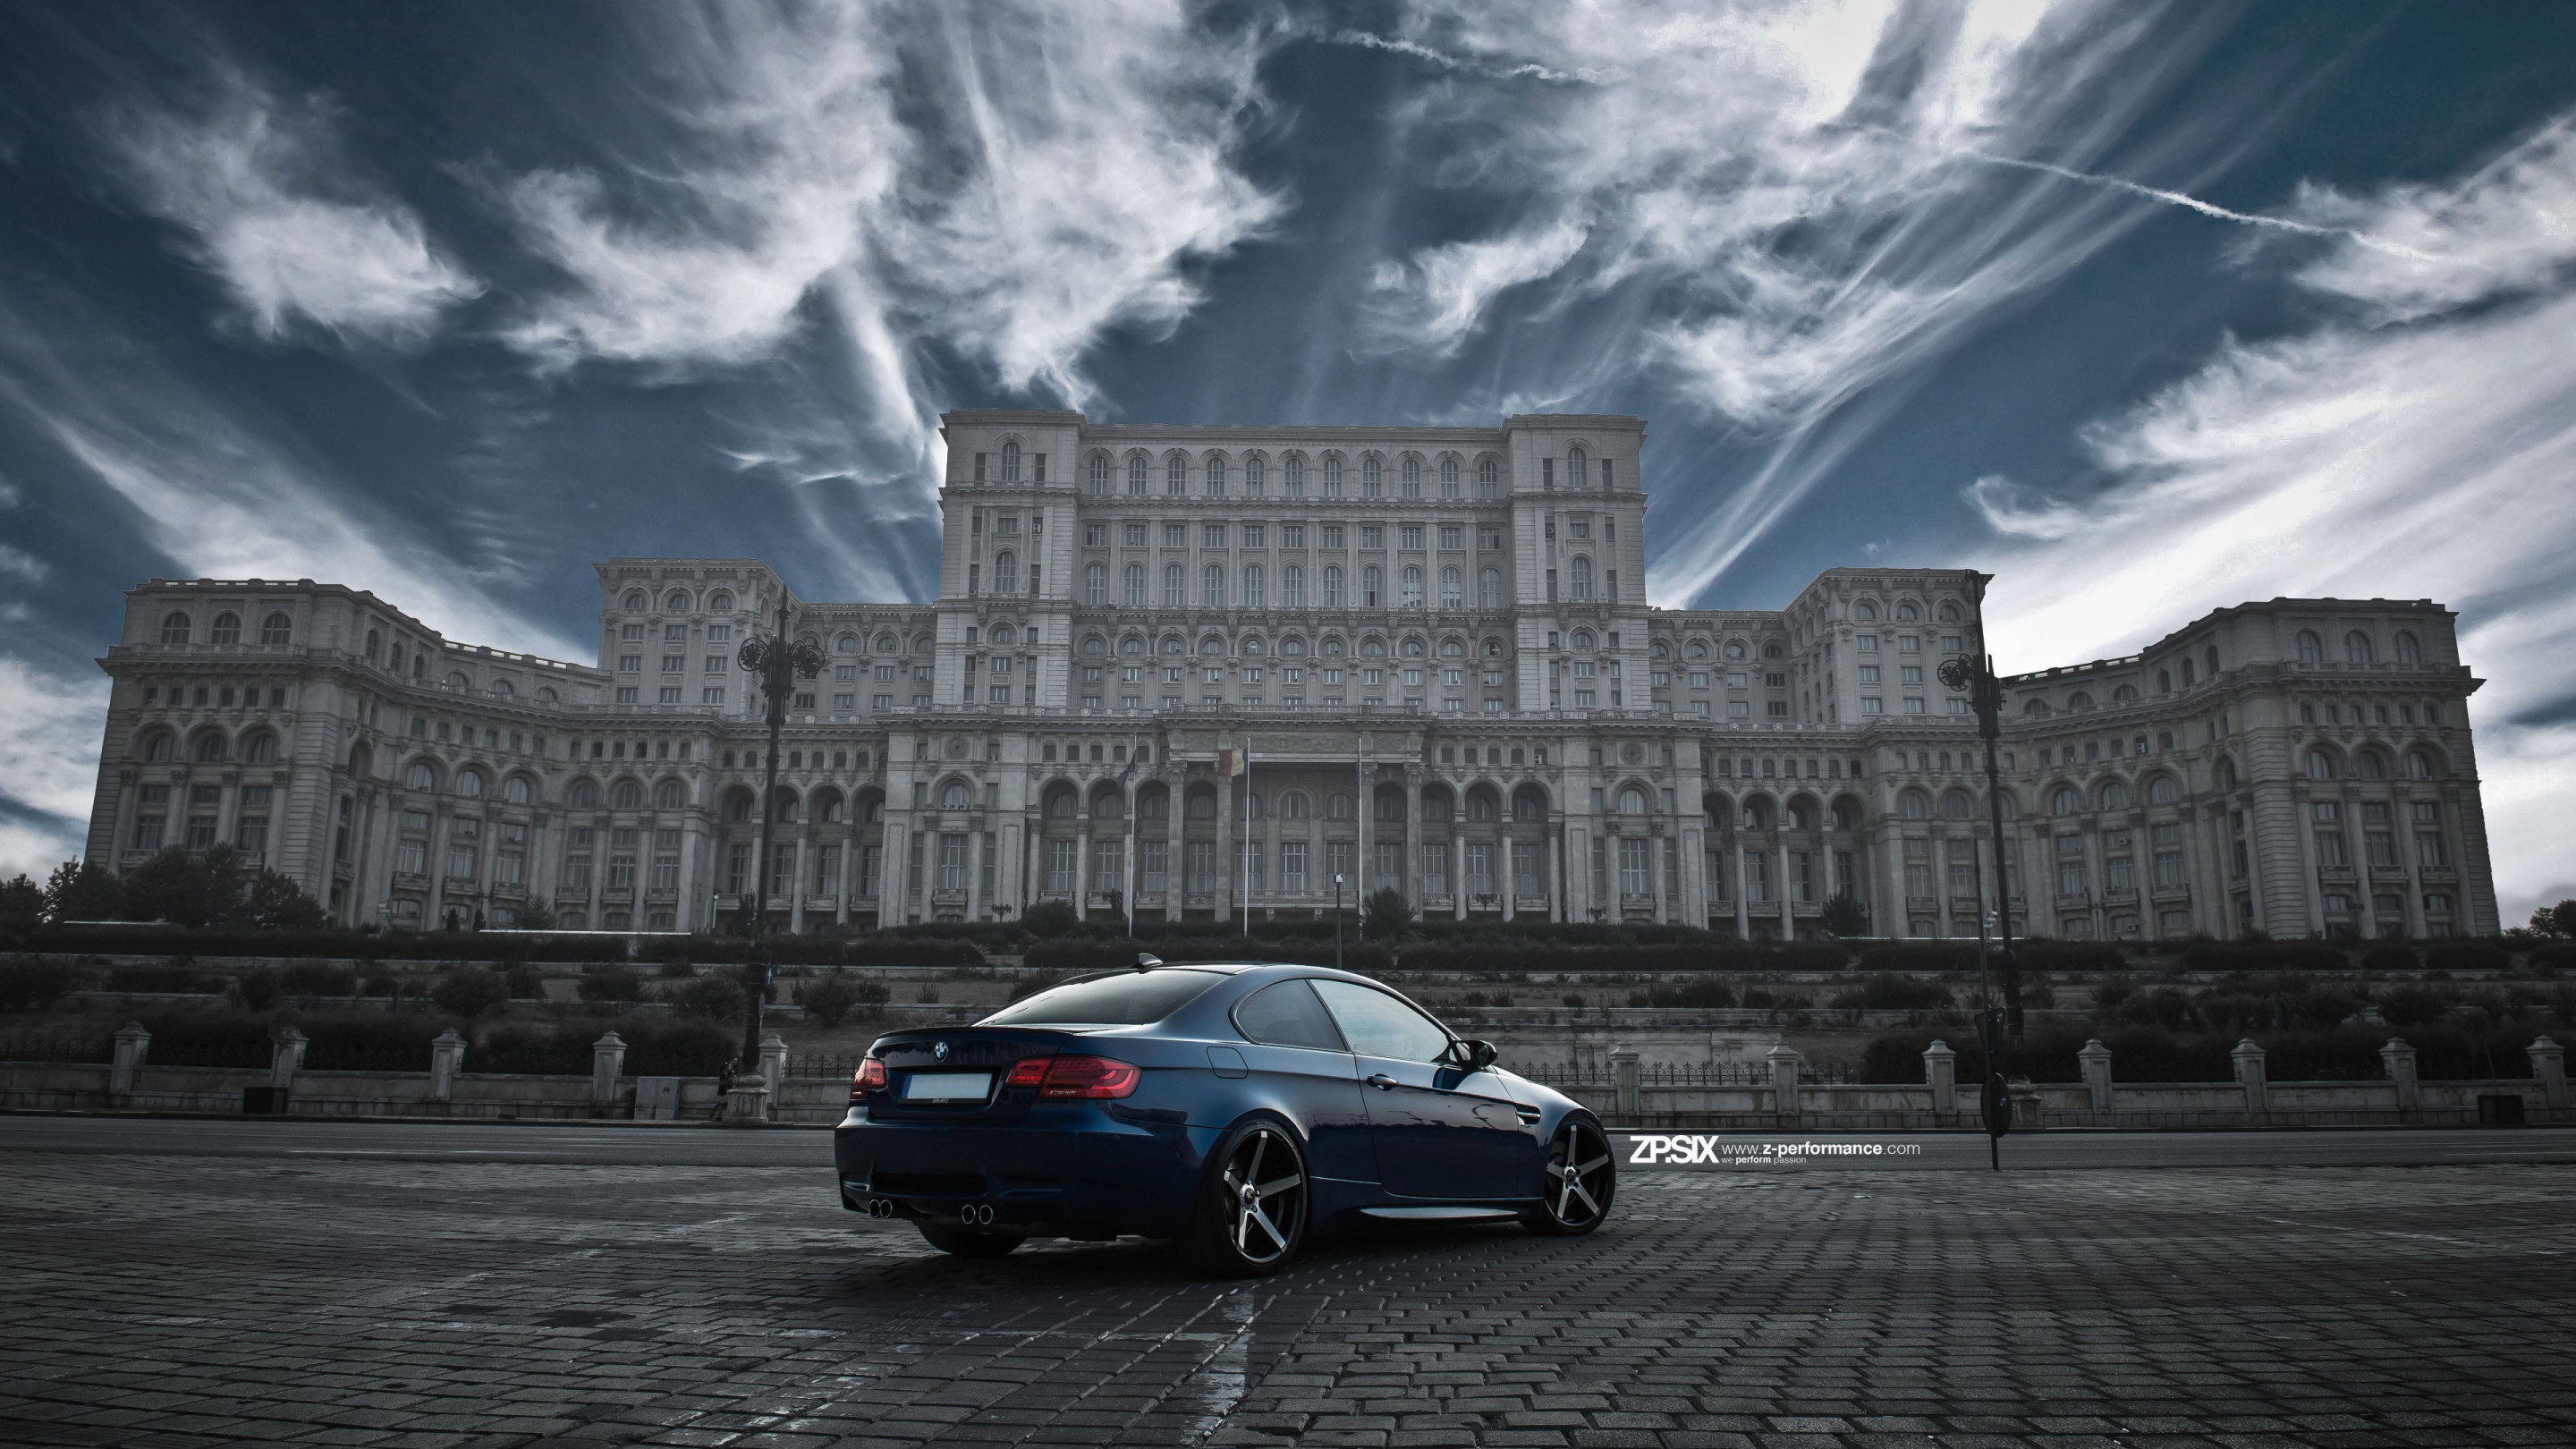 BMW E92 M3 in front of Palace of the Parliament wallpaper 2880x1620